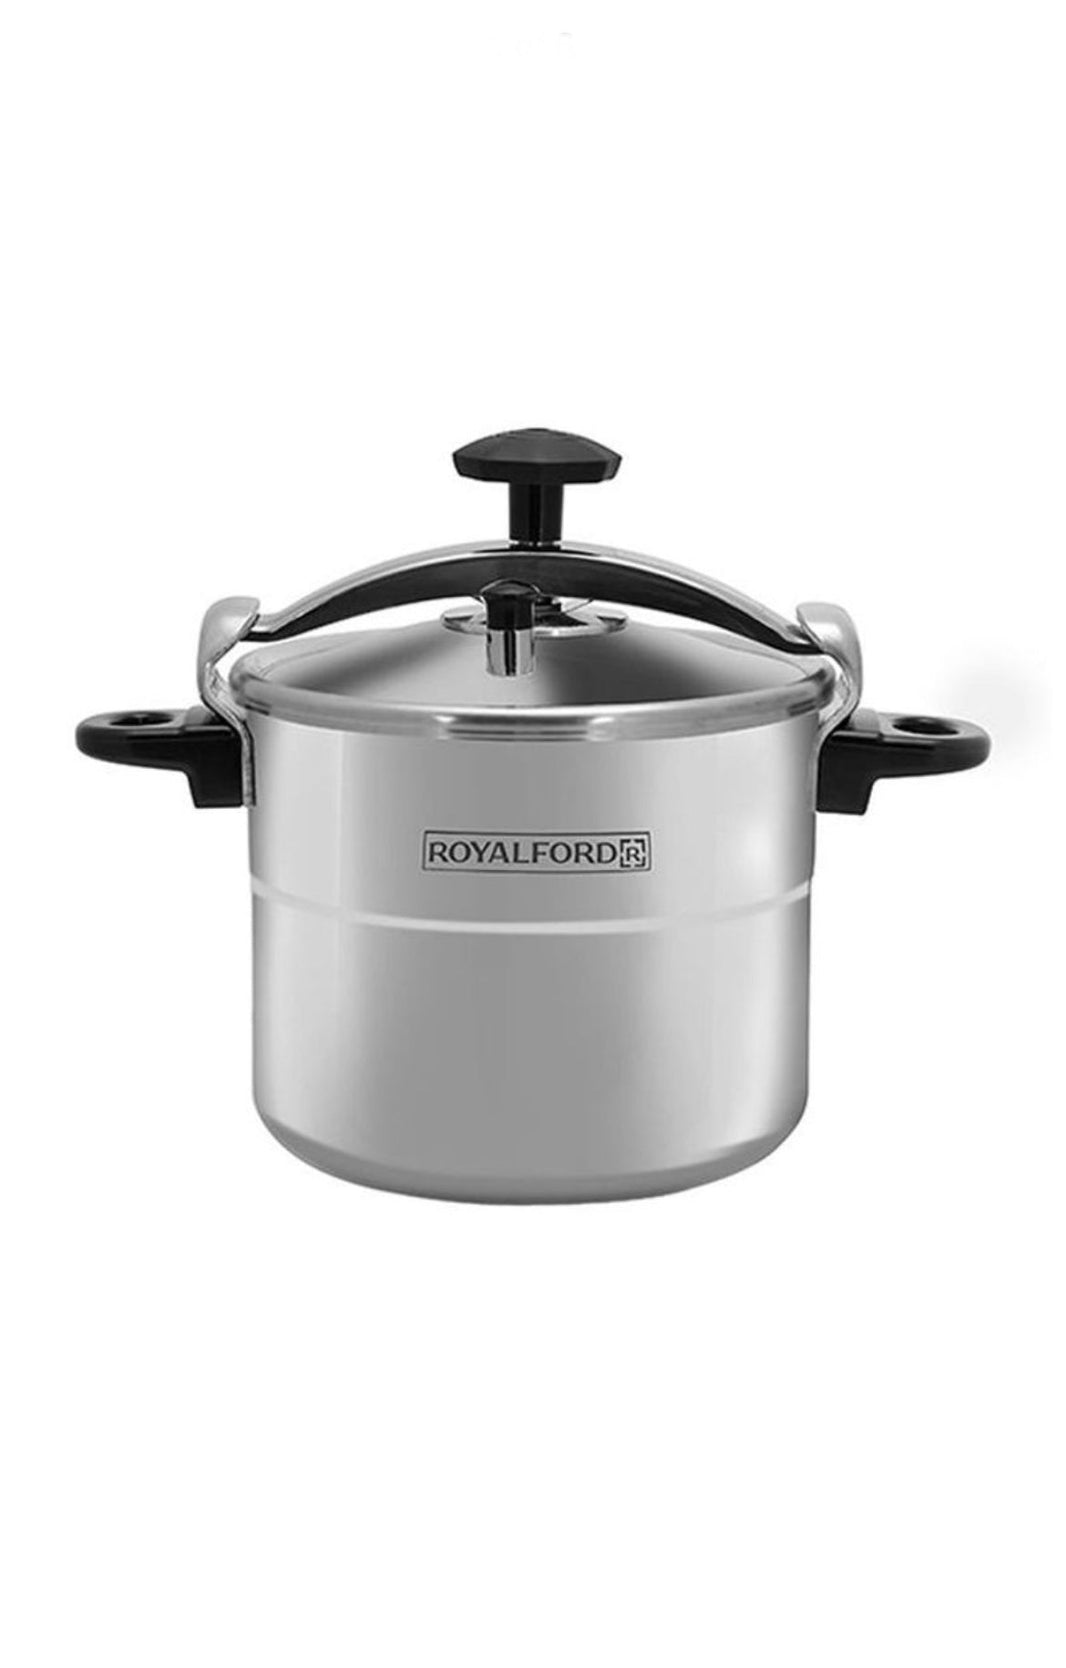 Royalford High Quality Durable Design Multipurpose Pressure Cooker With Lid Silver 7L